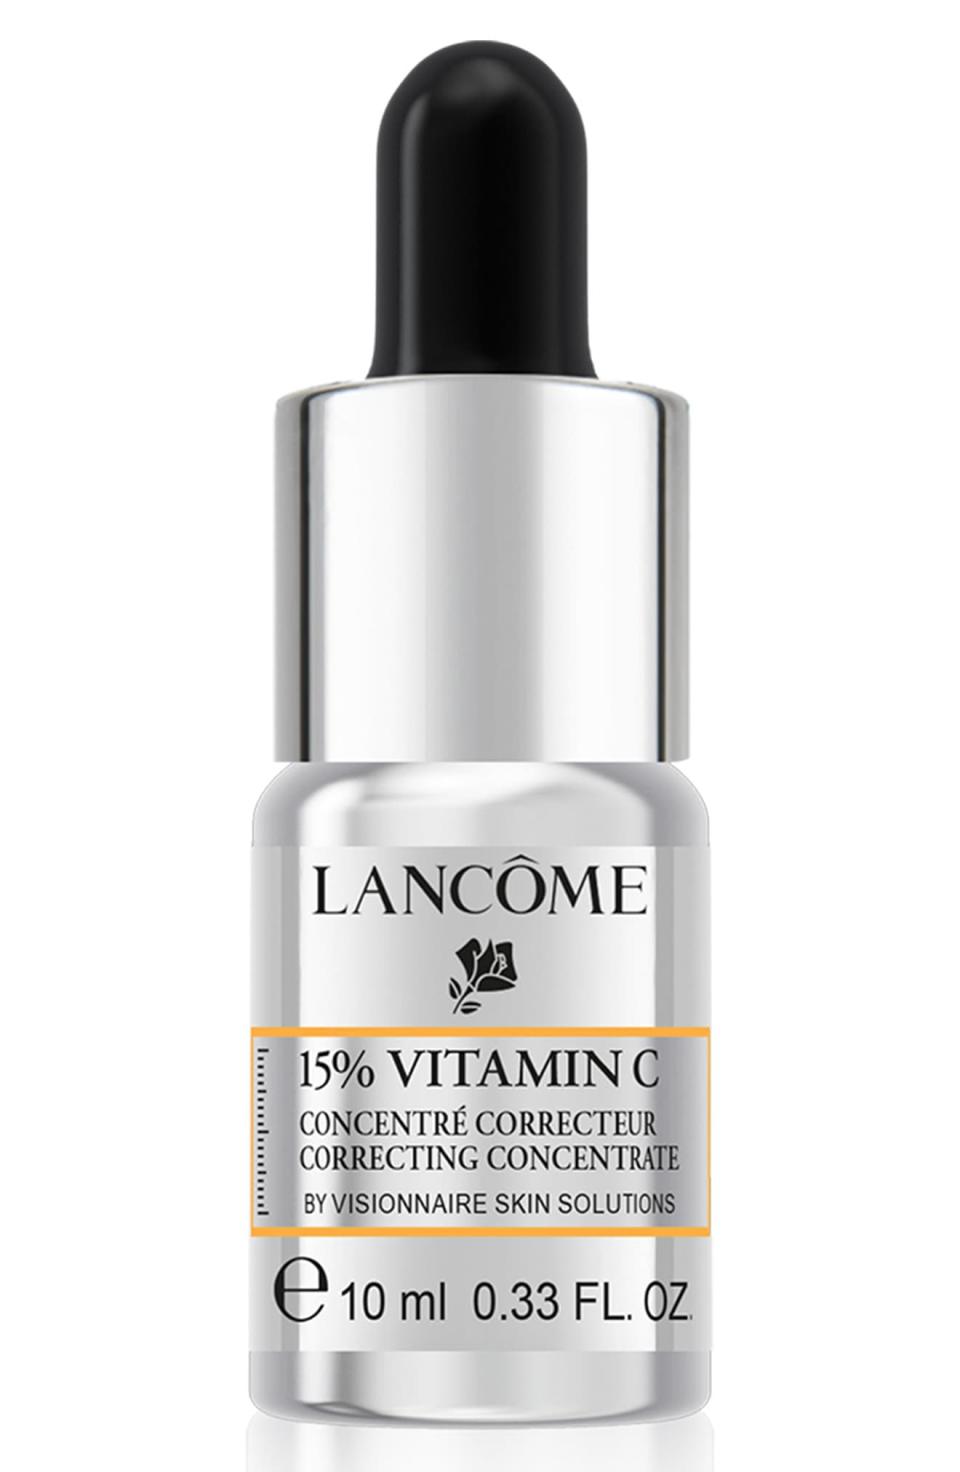 7) Visionnaire Skin Solutions 15% Vitamin C Correcting Concentrate Serum